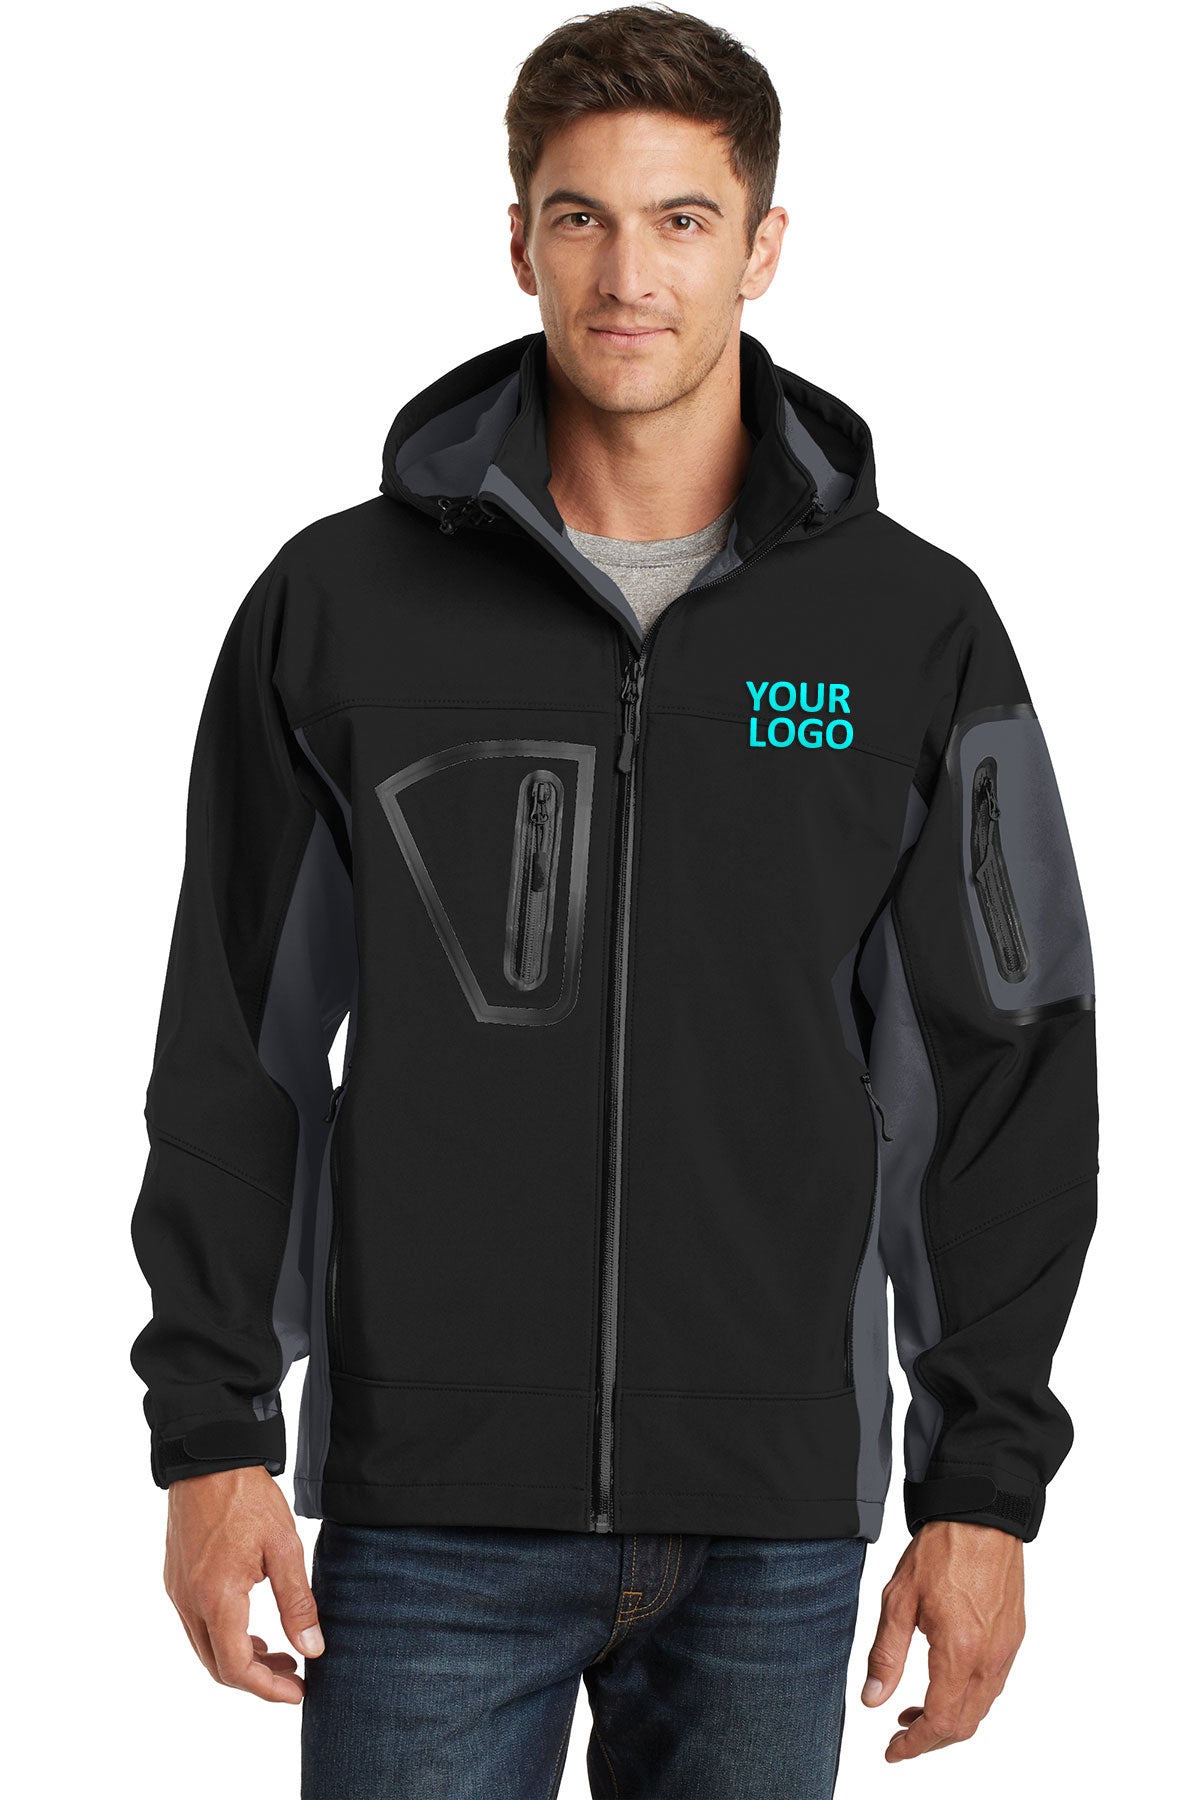 Port Authority Tall Waterproof Customized Soft Shell Jackets, Black/ Graphite